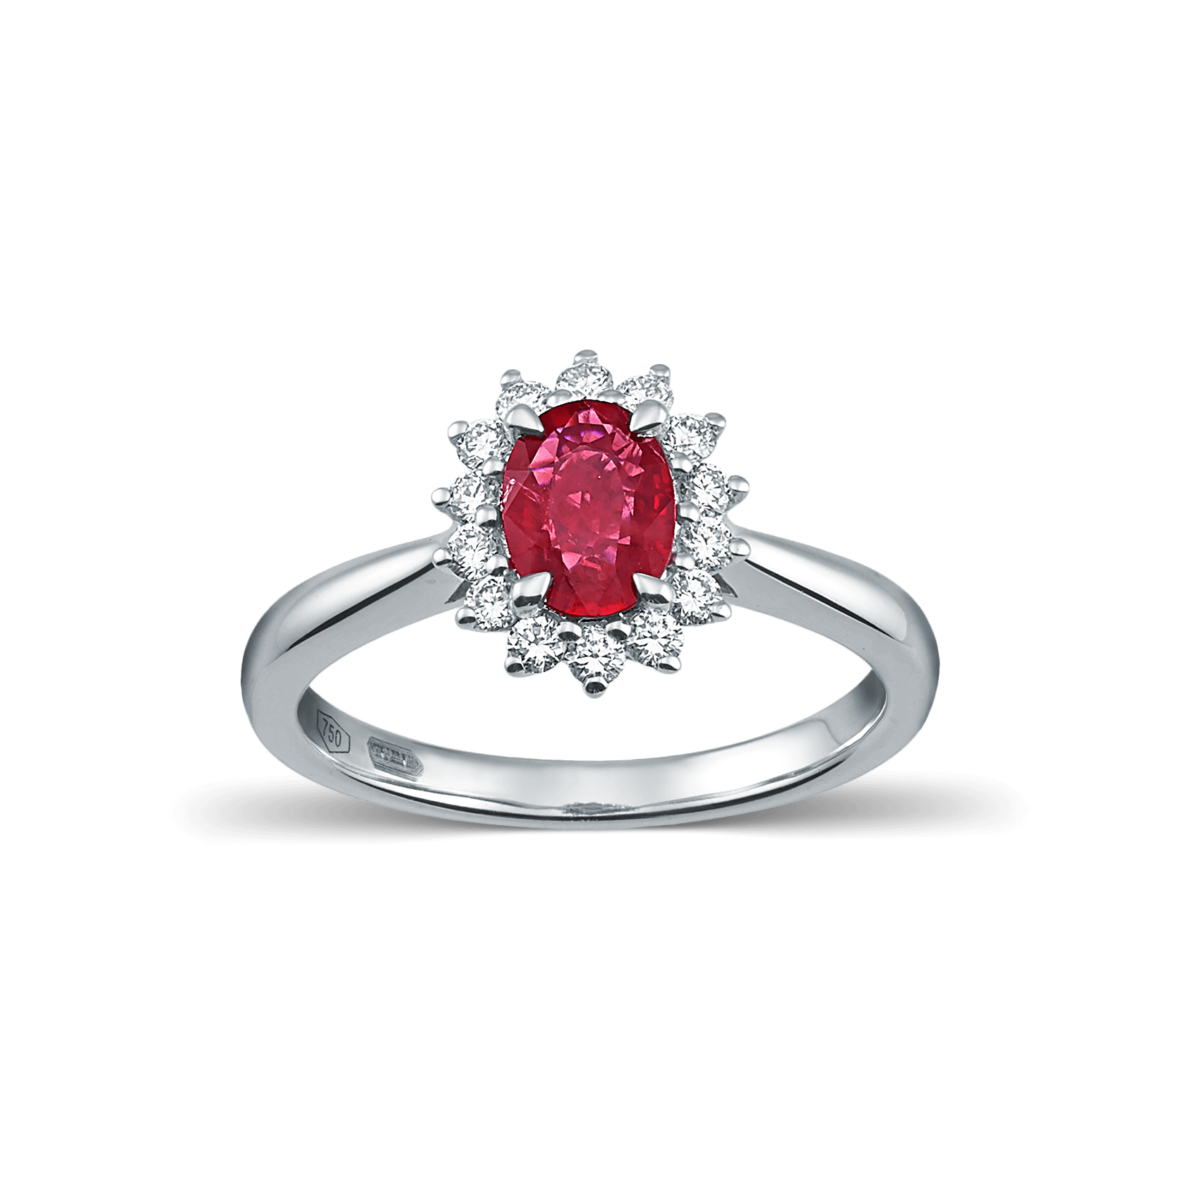 Devous Ruby Rosette Ring with Diamonds